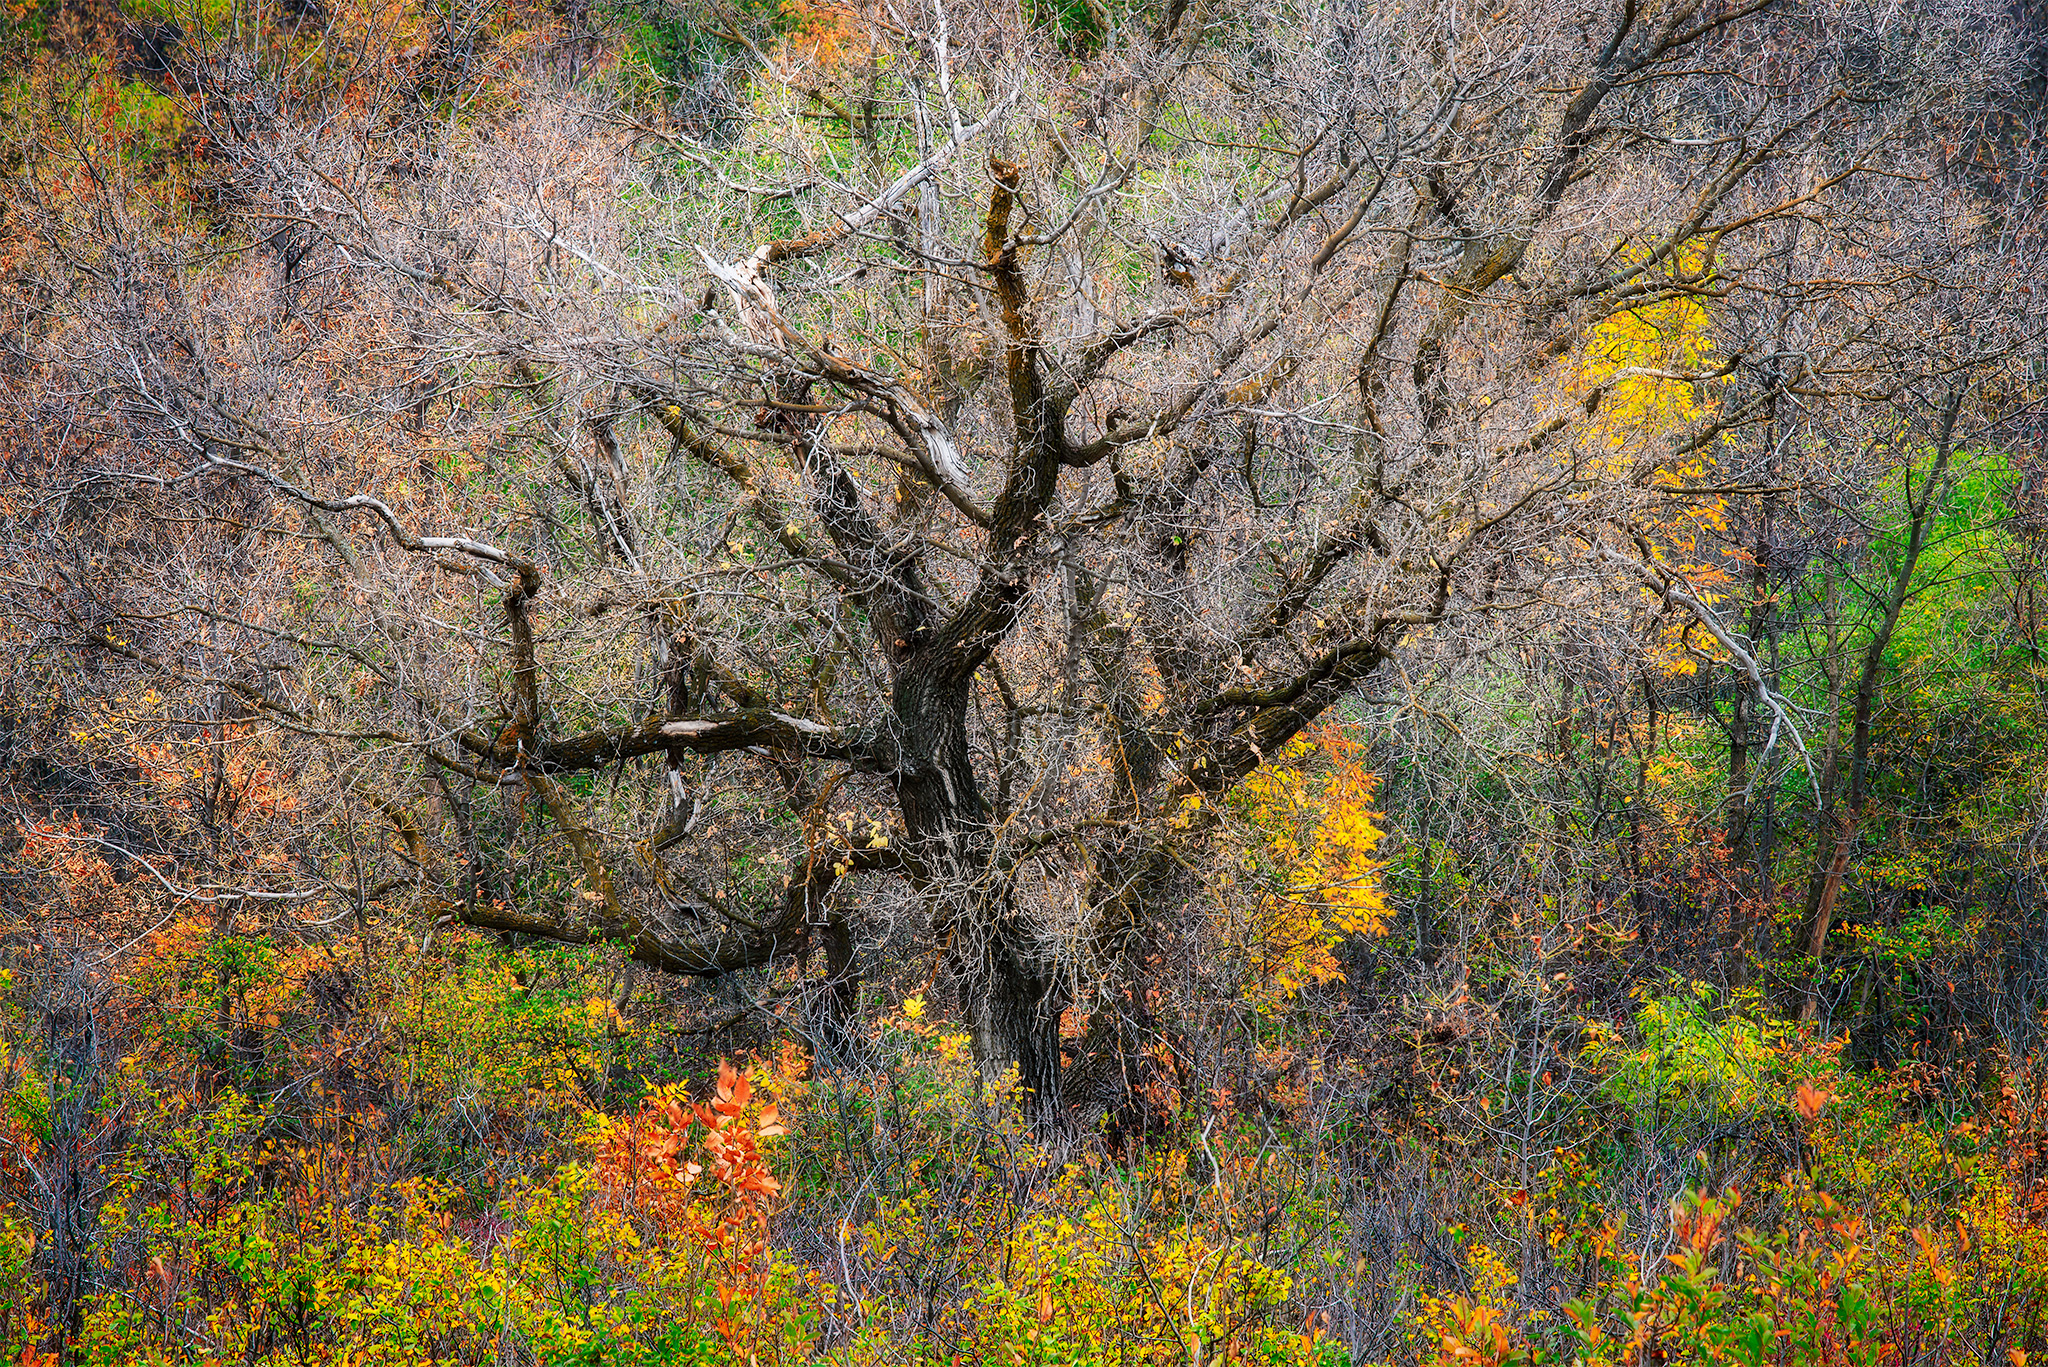 Nature Photography of an old dead tree in Saskatchewan surrounded by fall foliage